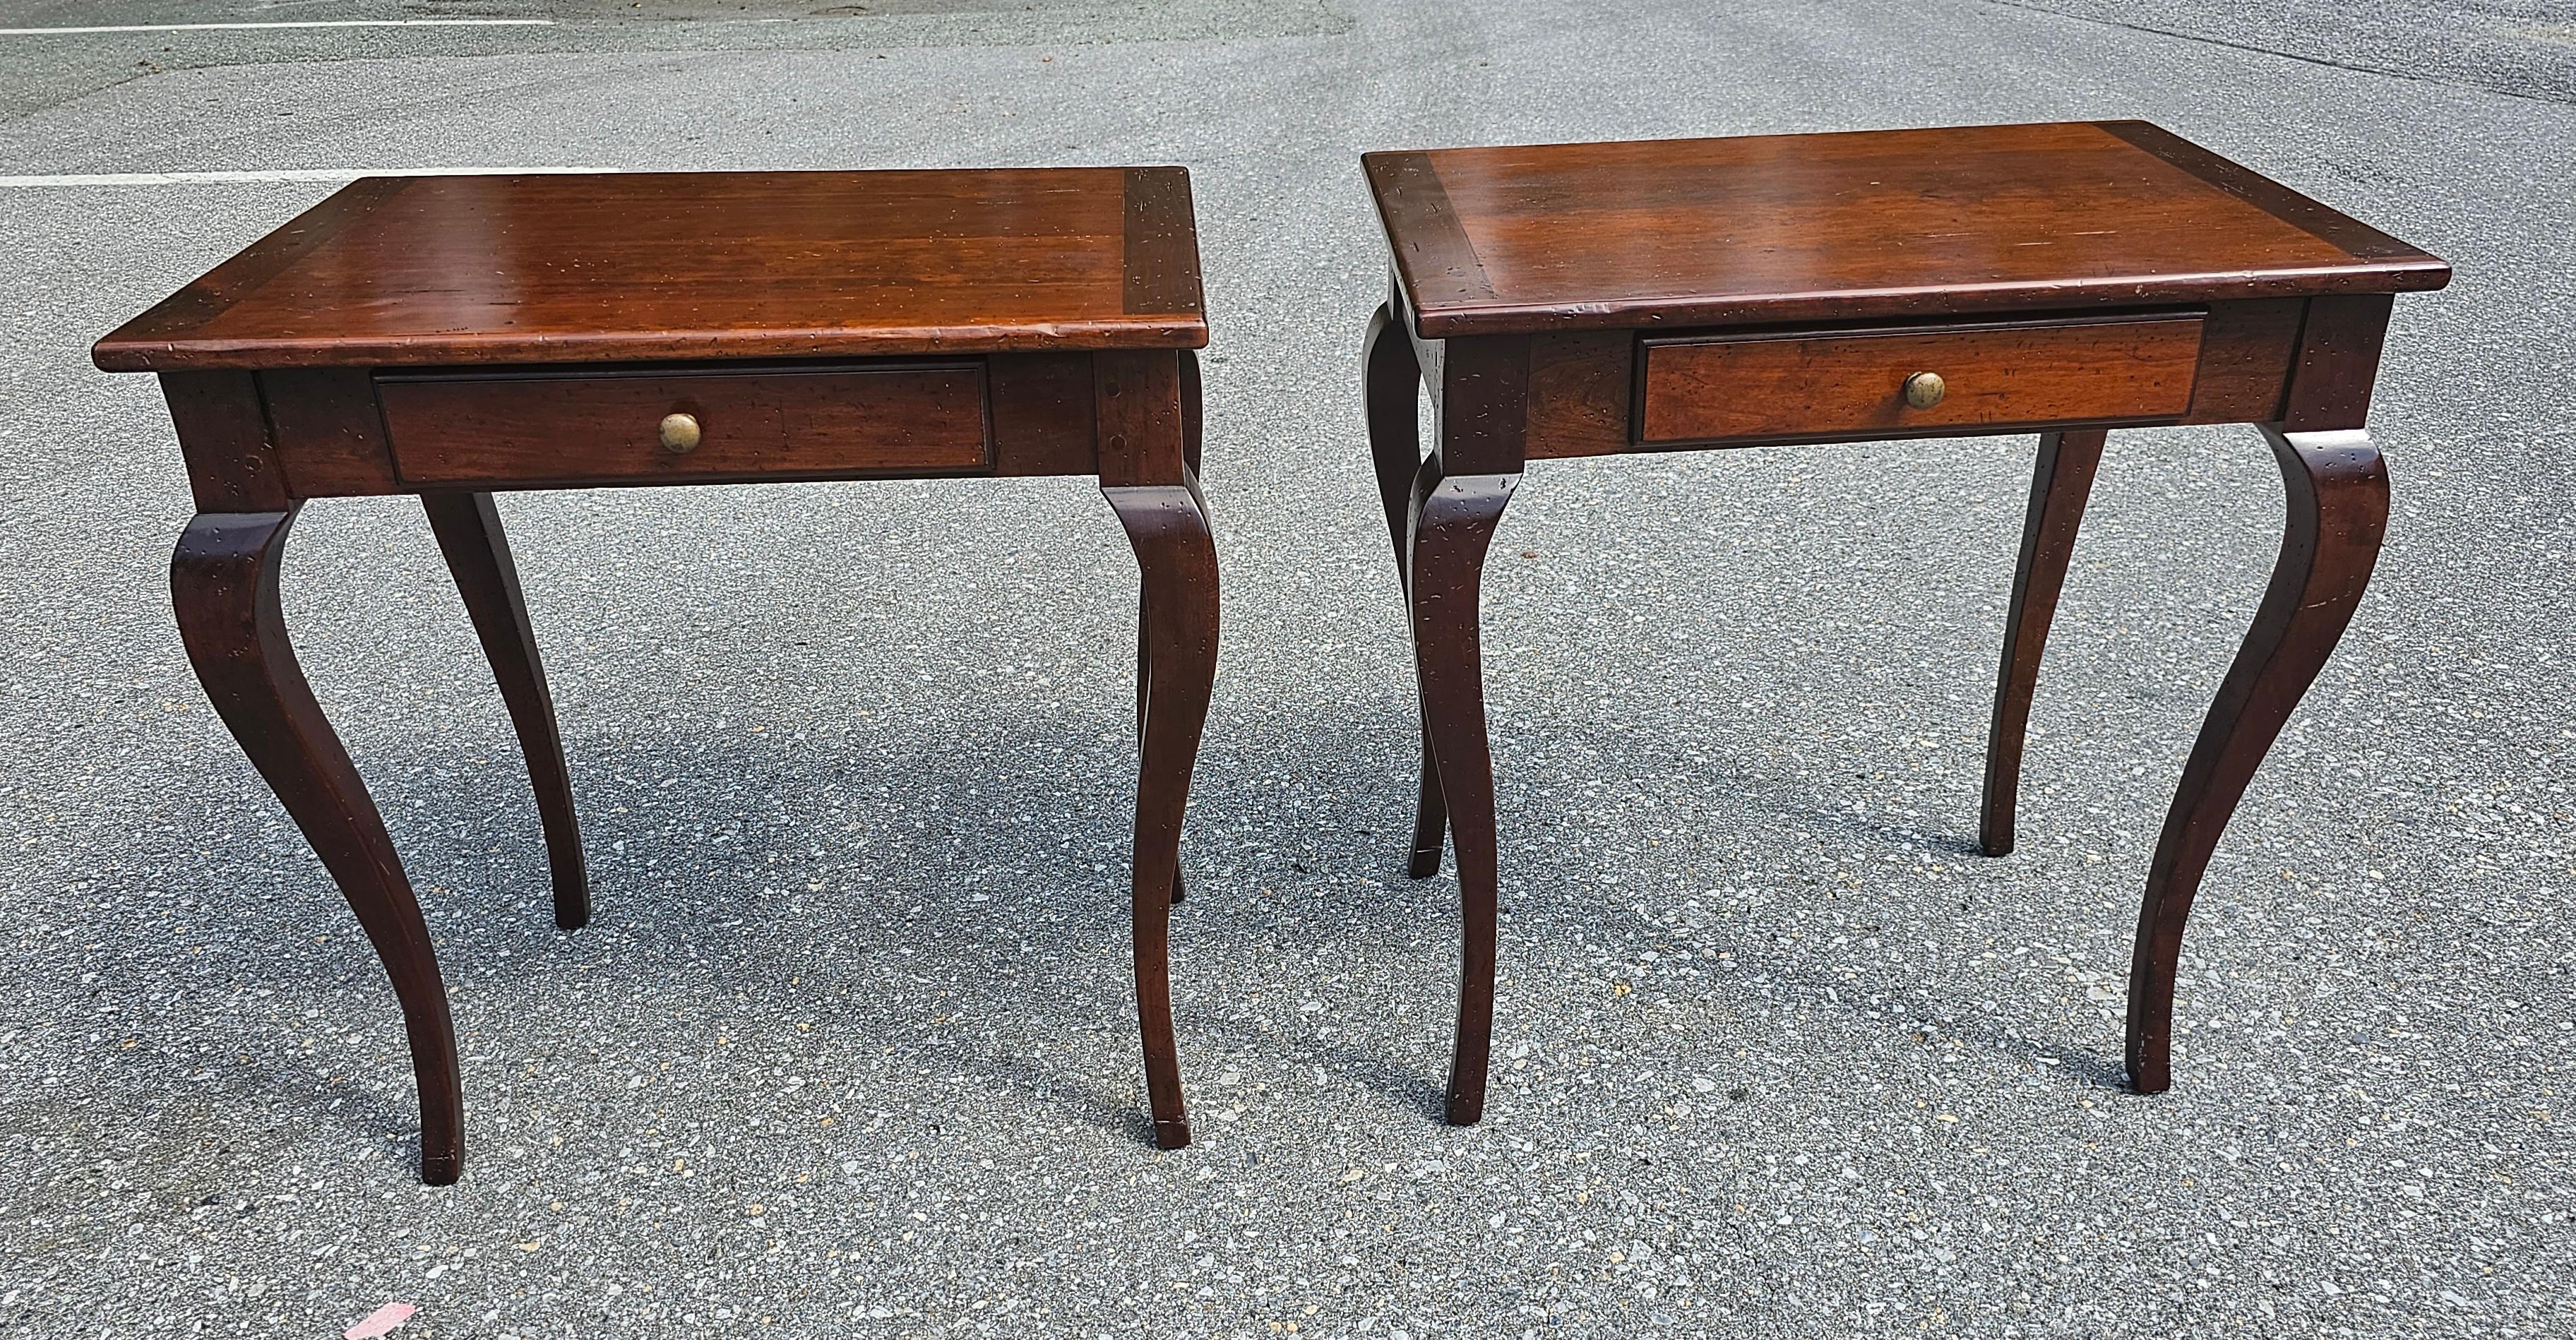 An exquisite pair of Kellogg Collection distressed walnut single drawer side tables in excellent condition. Fully Finished inside out. Measures 25